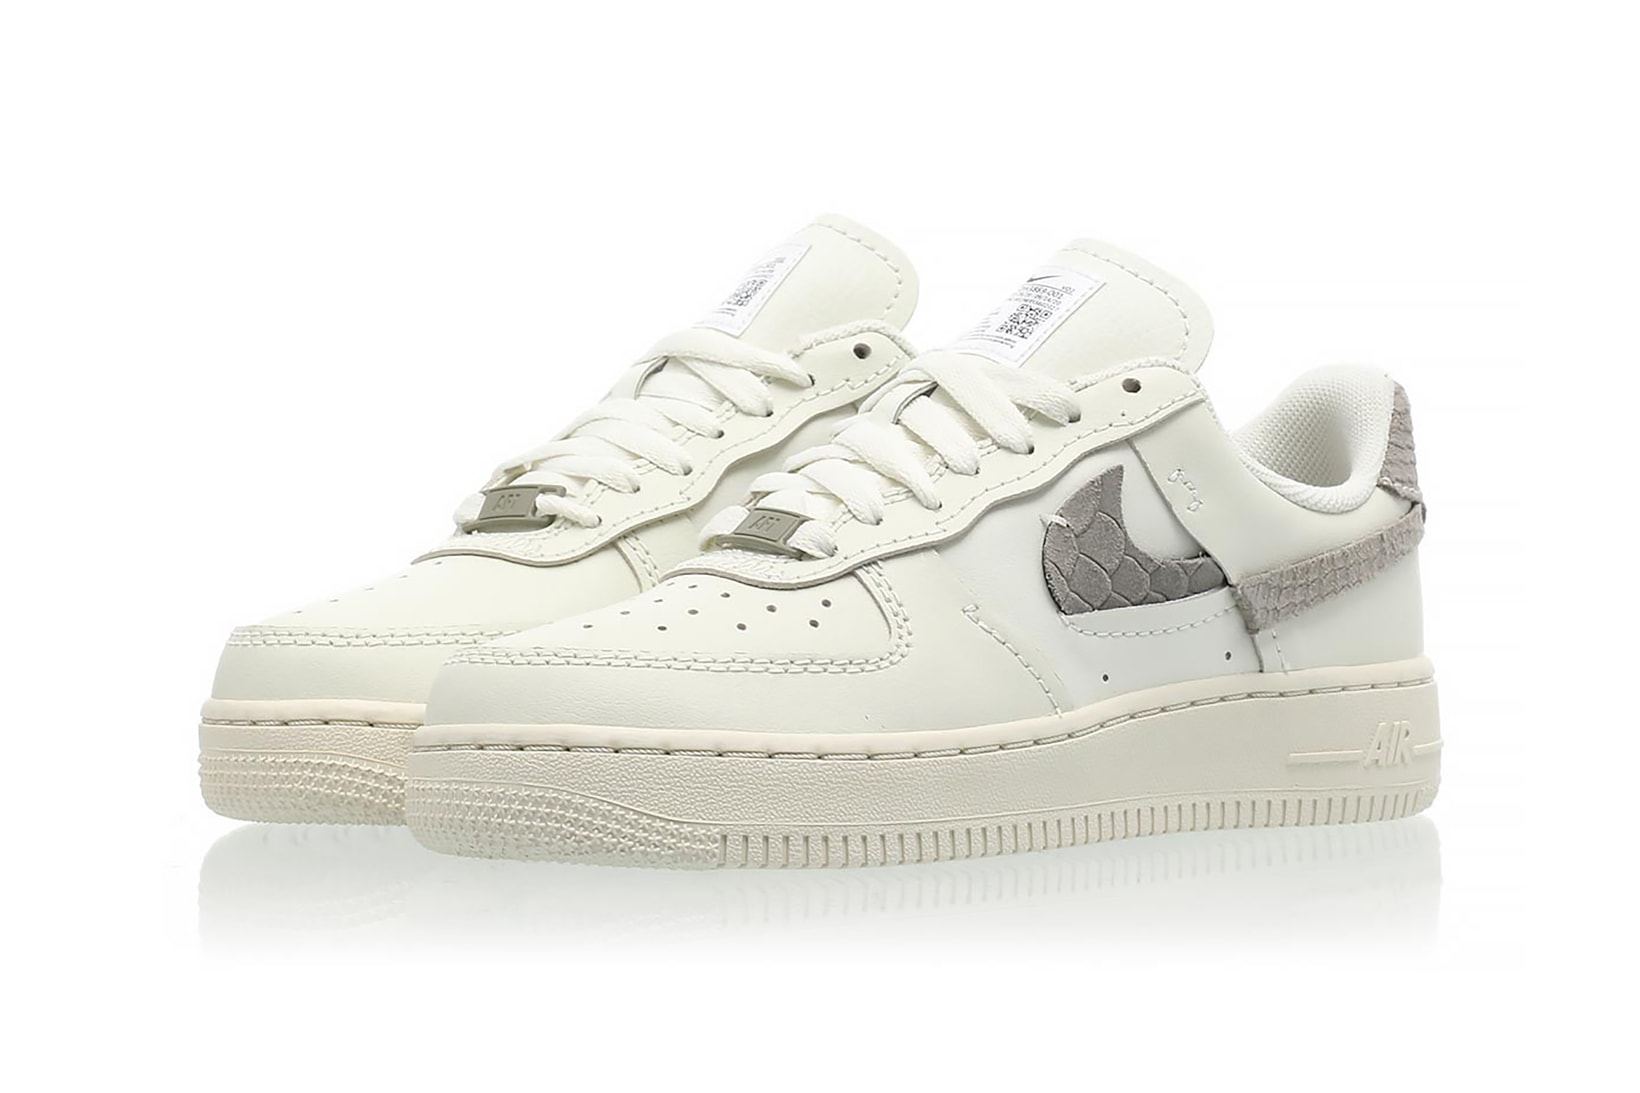 nike air force 1 af1 lxx sea glass womens sneakers gray silver white colorway shoes footwear kicks sneakerhead lateral laces